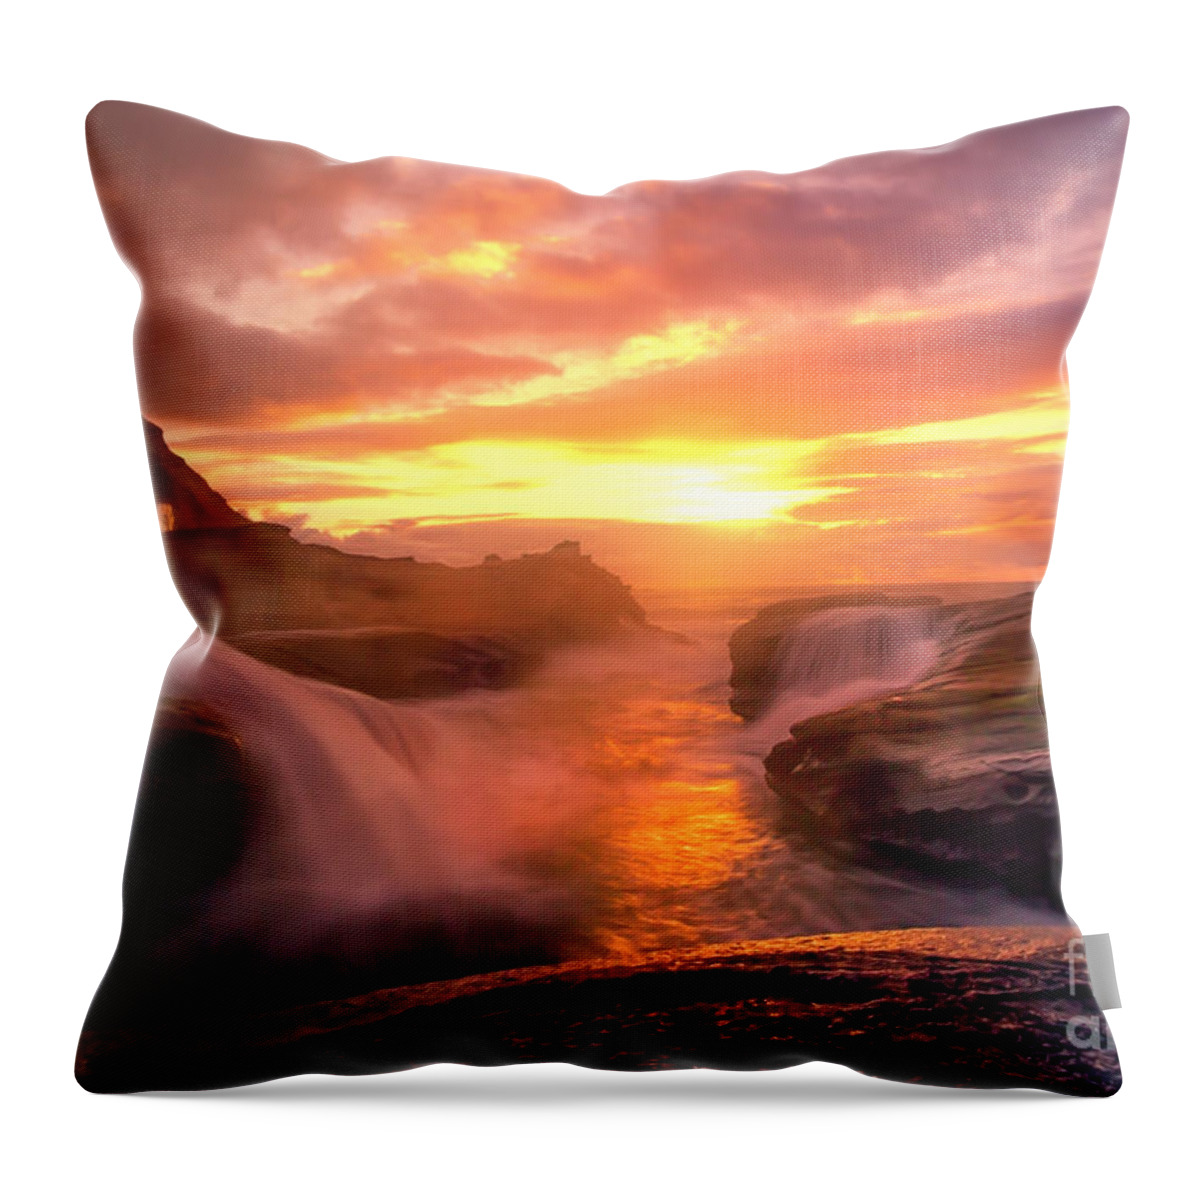  Oregon Throw Pillow featuring the photograph Rocky Oregon Coast 6 by Timothy Hacker